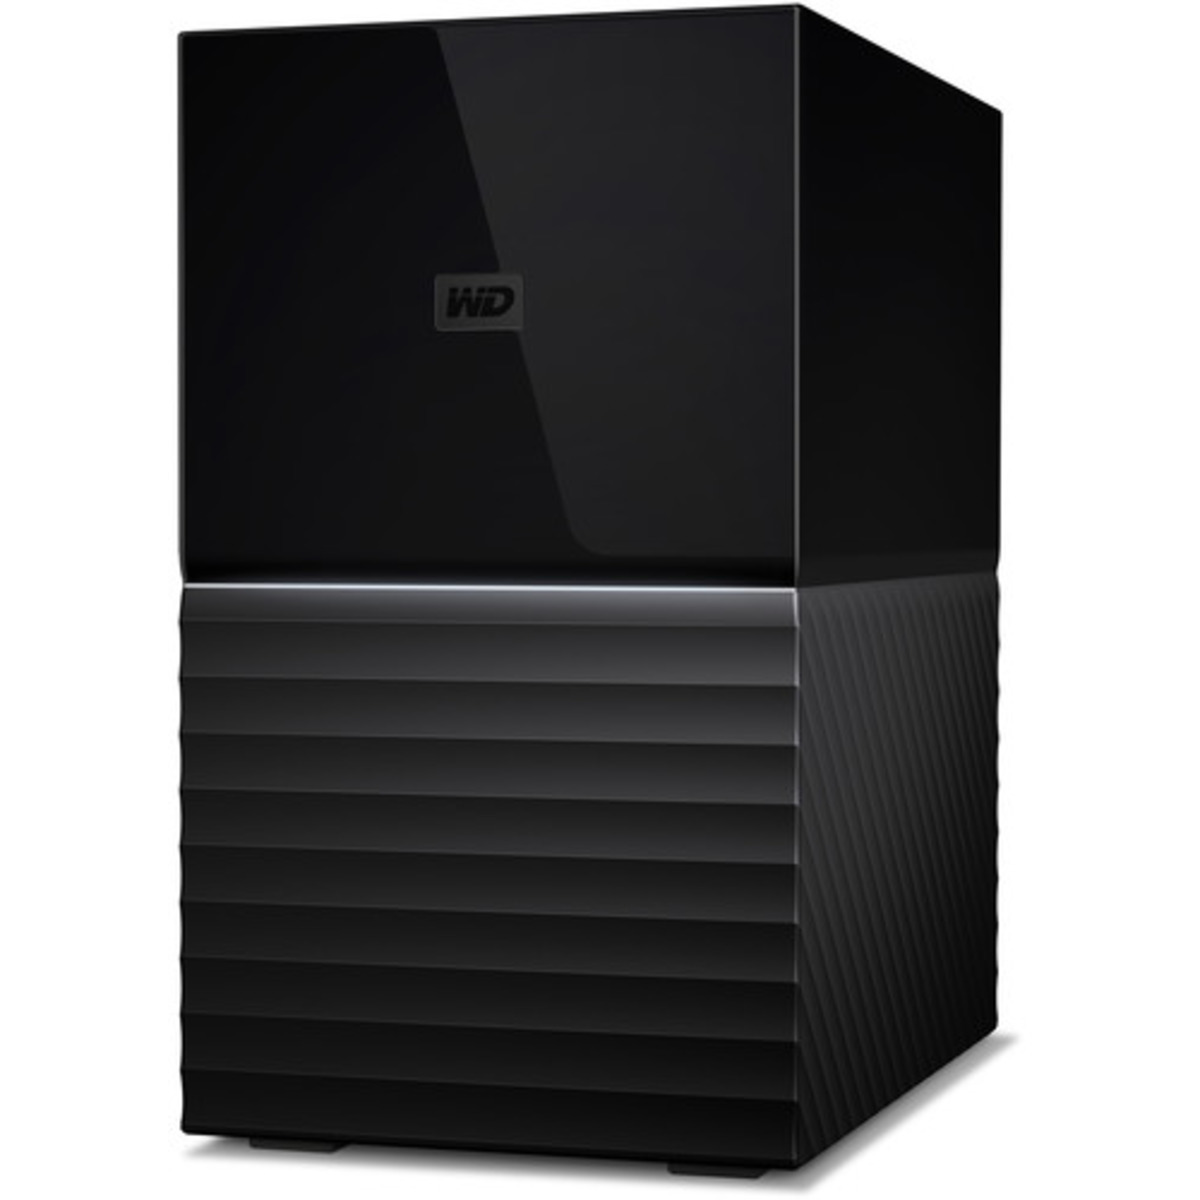 Western Digital My Book DUO Gen 2 12tb 2-Bay Desktop Personal / Basic Home / Small Office DAS - Direct Attached Storage Device 2x6tb Western Digital Red Pro WD6003FFBX 3.5 7200rpm SATA 6Gb/s HDD NAS Class Drives Installed - Burn-In Tested - ON SALE My Book DUO Gen 2